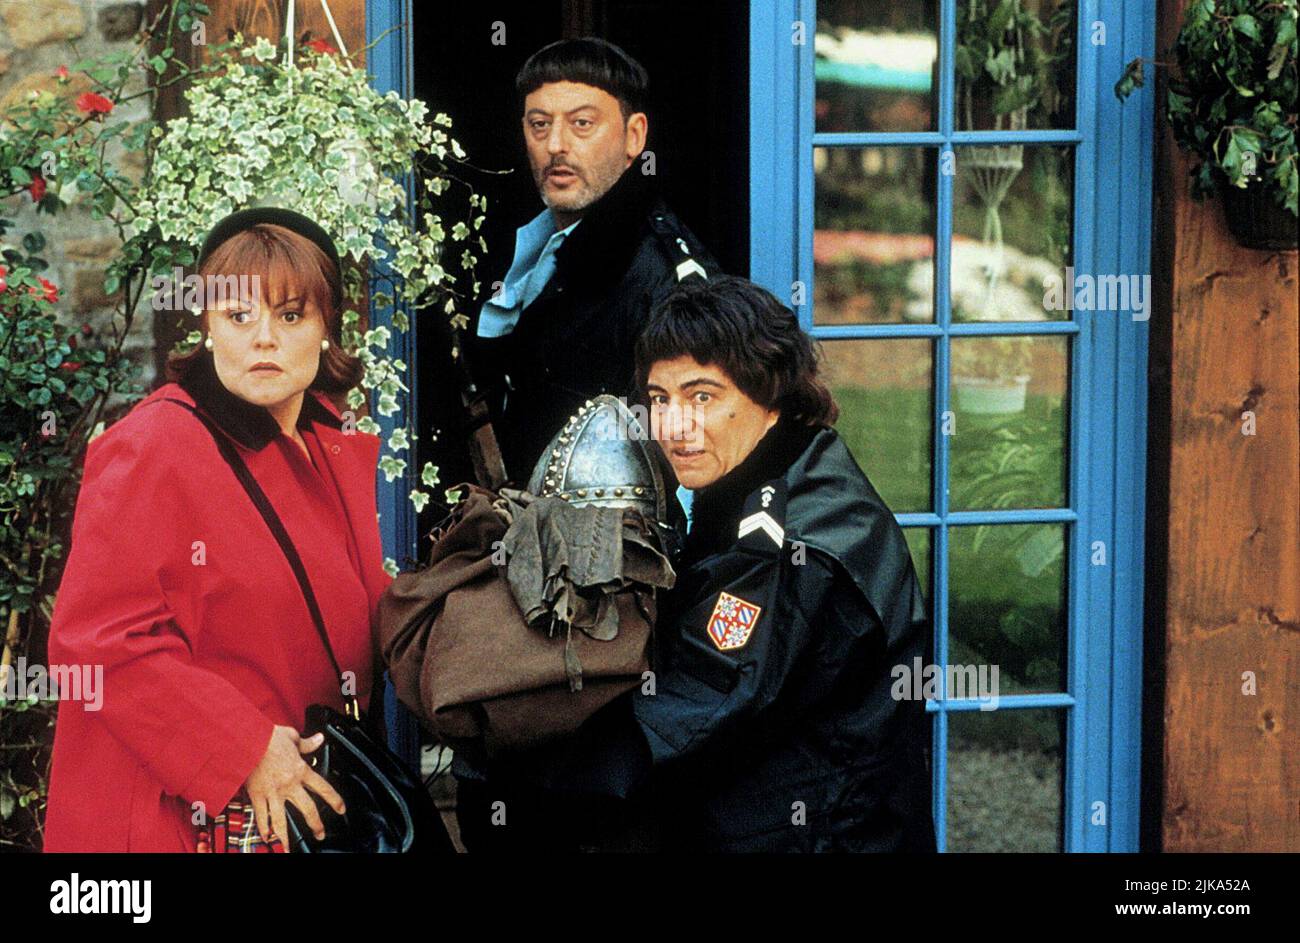 Muriel Robin, Jean Reno & Christian Clavier Film: Corridors Of Time:  Visitors Ii (1998) Characters: Frenegonde,Comte Godefroy de Montmirail, dit  Godefroy le Hardi & Jacquouille la Fripouille Director: Jean-Marie Poire 11  February